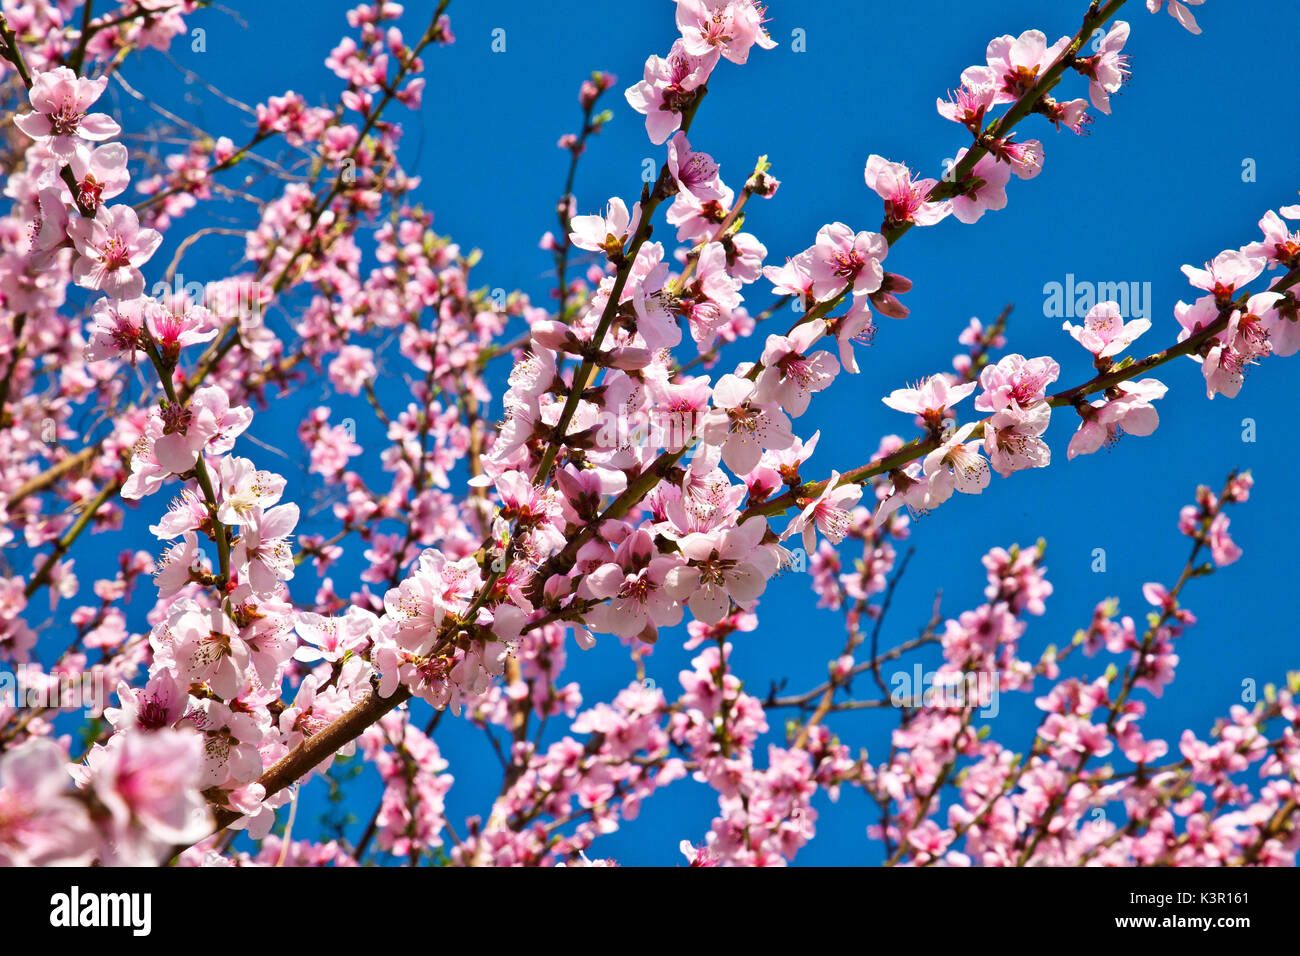 The bright blue of the sky contrasting with the subtle pink of a blooming peach tree. Lombardy Italy Europe Stock Photo